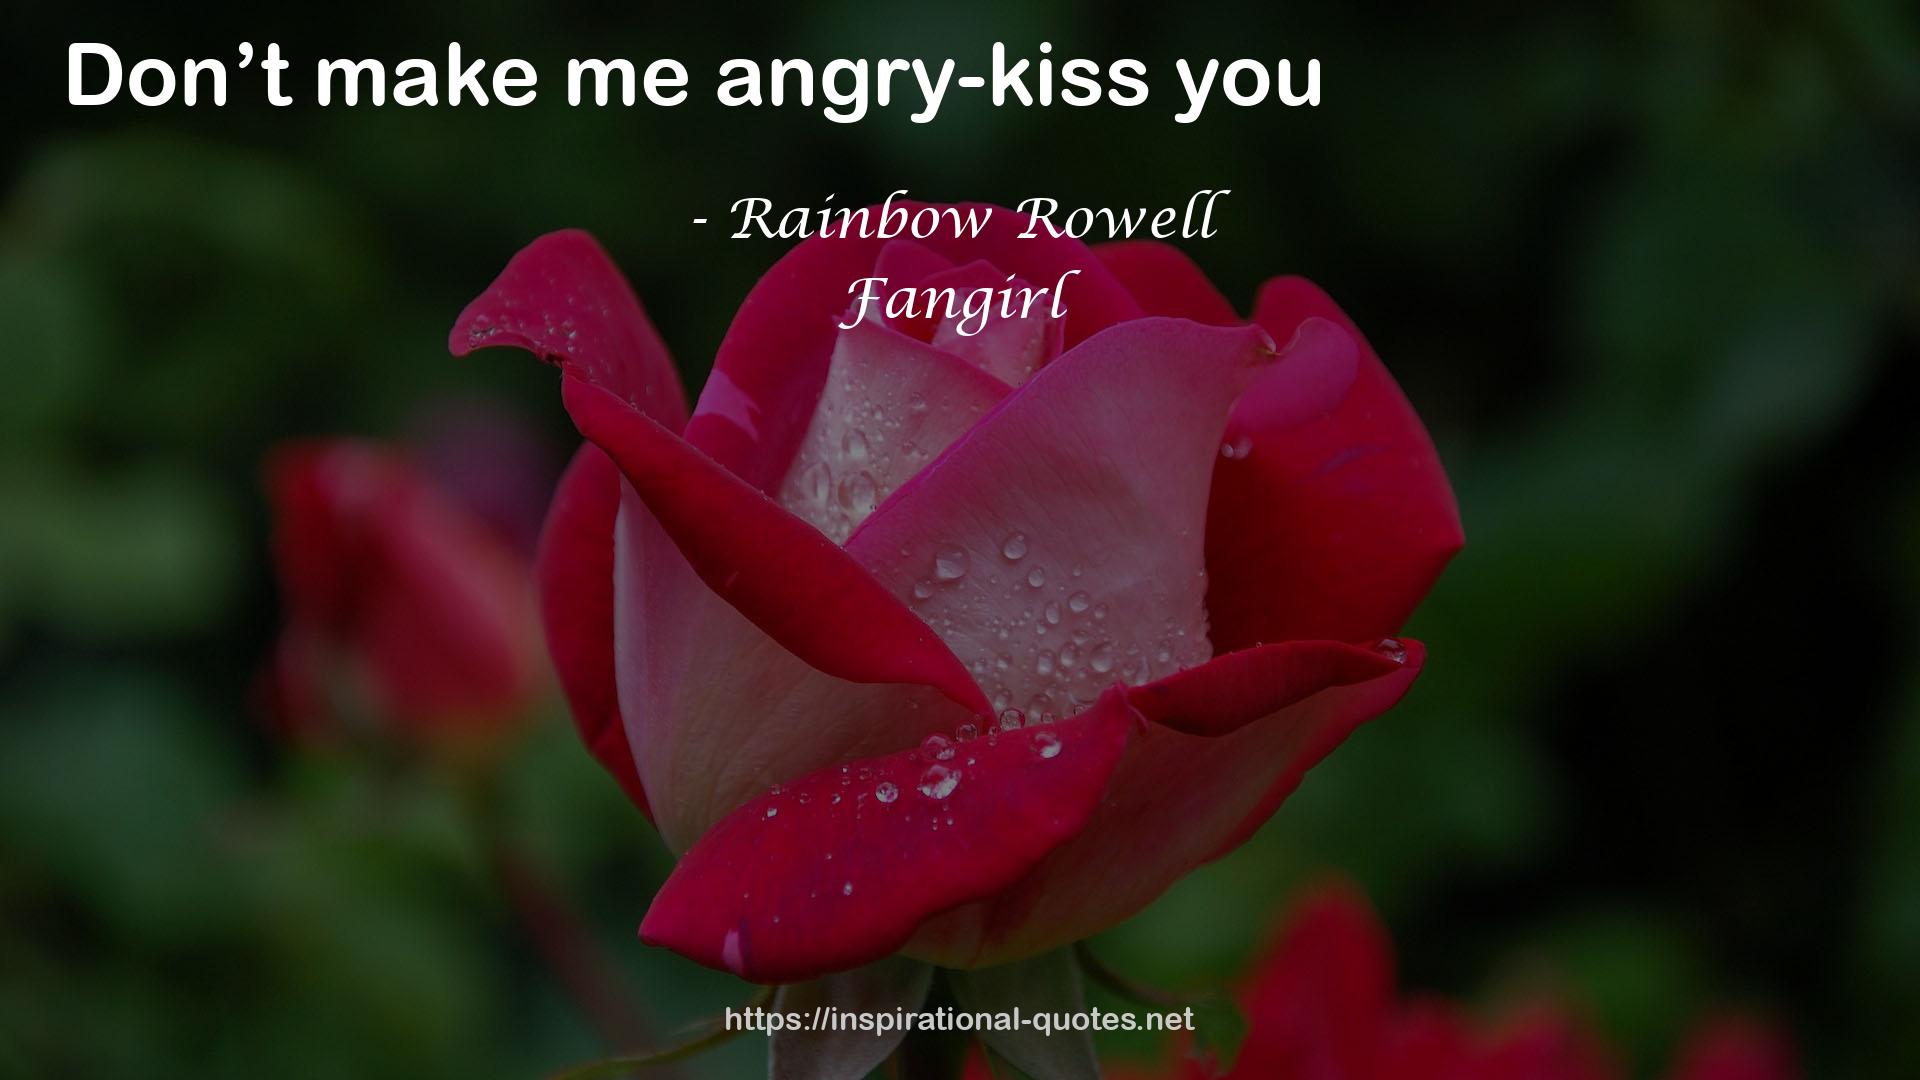 Rainbow Rowell quote : Don’t make me angry-kiss you